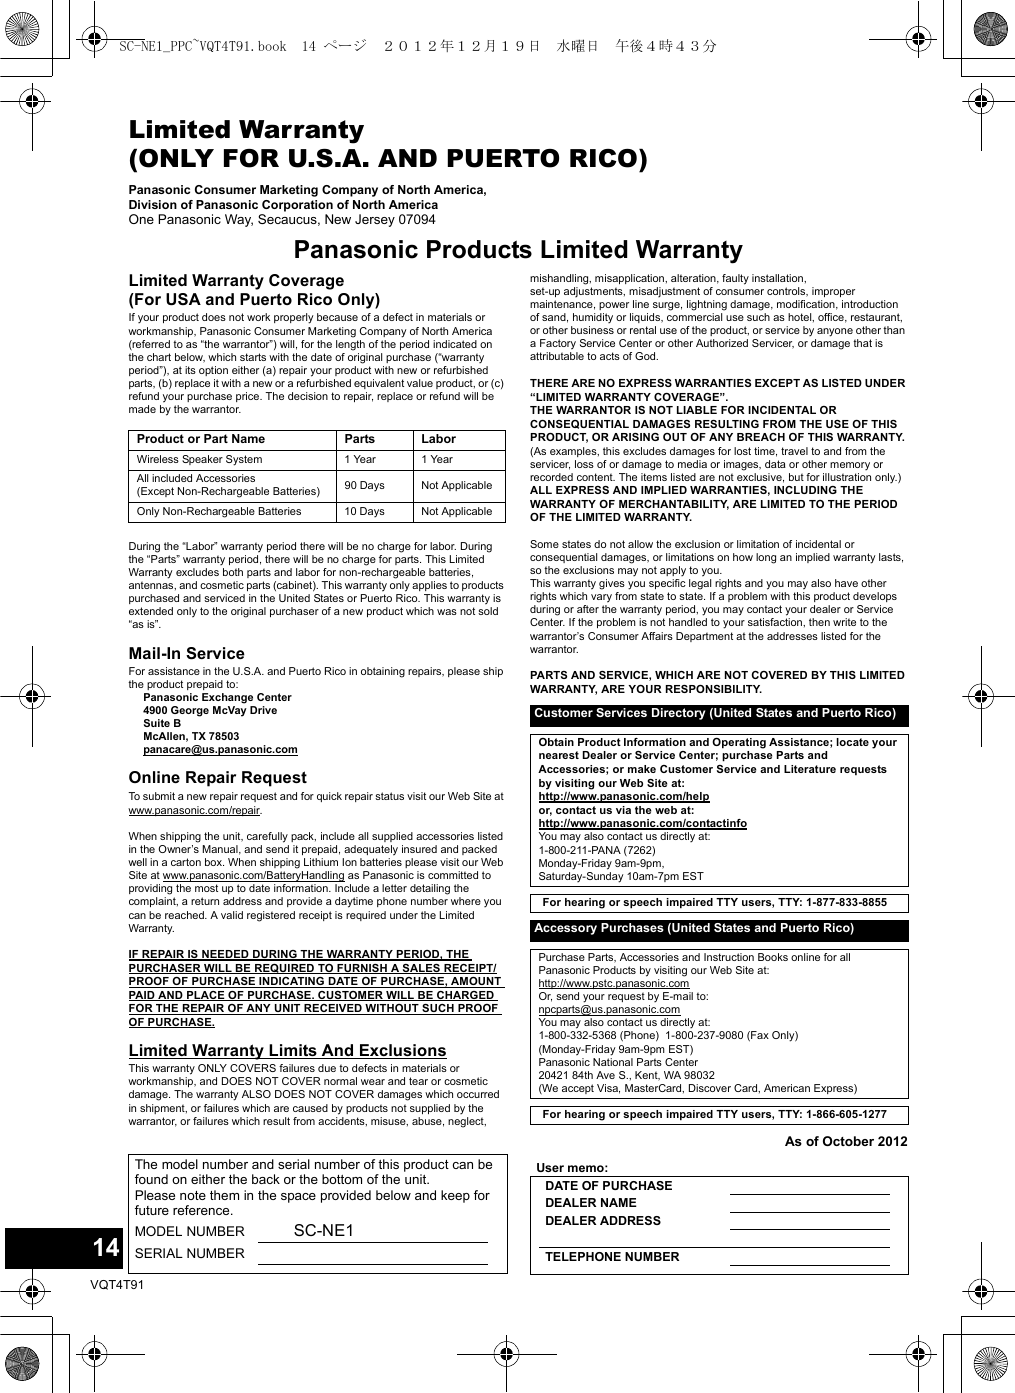 14VQT4T91Limited Warranty (ONLY FOR U.S.A. AND PUERTO RICO)Panasonic Consumer Marketing Company of North America, Division of Panasonic Corporation of North AmericaOne Panasonic Way, Secaucus, New Jersey 07094Panasonic Products Limited WarrantyLimited Warranty Coverage(For USA and Puerto Rico Only)If your product does not work properly because of a defect in materials or workmanship, Panasonic Consumer Marketing Company of North America (referred to as “the warrantor”) will, for the length of the period indicated on the chart below, which starts with the date of original purchase (“warranty period”), at its option either (a) repair your product with new or refurbished parts, (b) replace it with a new or a refurbished equivalent value product, or (c) refund your purchase price. The decision to repair, replace or refund will be made by the warrantor.During the “Labor” warranty period there will be no charge for labor. During the “Parts” warranty period, there will be no charge for parts. This Limited Warranty excludes both parts and labor for non-rechargeable batteries, antennas, and cosmetic parts (cabinet). This warranty only applies to products purchased and serviced in the United States or Puerto Rico. This warranty is extended only to the original purchaser of a new product which was not sold “as is”.Mail-In ServiceFor assistance in the U.S.A. and Puerto Rico in obtaining repairs, please ship the product prepaid to:Panasonic Exchange Center 4900 George McVay Drive Suite B McAllen, TX 78503panacare@us.panasonic.comOnline Repair RequestTo submit a new repair request and for quick repair status visit our Web Site at www.panasonic.com/repair.When shipping the unit, carefully pack, include all supplied accessories listed in the Owner’s Manual, and send it prepaid, adequately insured and packed well in a carton box. When shipping Lithium Ion batteries please visit our Web Site at www.panasonic.com/BatteryHandling as Panasonic is committed to providing the most up to date information. Include a letter detailing the complaint, a return address and provide a daytime phone number where you can be reached. A valid registered receipt is required under the Limited Warranty.IF REPAIR IS NEEDED DURING THE WARRANTY PERIOD, THE PURCHASER WILL BE REQUIRED TO FURNISH A SALES RECEIPT/PROOF OF PURCHASE INDICATING DATE OF PURCHASE, AMOUNT PAID AND PLACE OF PURCHASE. CUSTOMER WILL BE CHARGED FOR THE REPAIR OF ANY UNIT RECEIVED WITHOUT SUCH PROOF OF PURCHASE.Limited Warranty Limits And ExclusionsThis warranty ONLY COVERS failures due to defects in materials or workmanship, and DOES NOT COVER normal wear and tear or cosmetic damage. The warranty ALSO DOES NOT COVER damages which occurred in shipment, or failures which are caused by products not supplied by the warrantor, or failures which result from accidents, misuse, abuse, neglect, mishandling, misapplication, alteration, faulty installation, set-up adjustments, misadjustment of consumer controls, improper maintenance, power line surge, lightning damage, modification, introduction of sand, humidity or liquids, commercial use such as hotel, office, restaurant, or other business or rental use of the product, or service by anyone other than a Factory Service Center or other Authorized Servicer, or damage that is attributable to acts of God.THERE ARE NO EXPRESS WARRANTIES EXCEPT AS LISTED UNDER “LIMITED WARRANTY COVERAGE”.THE WARRANTOR IS NOT LIABLE FOR INCIDENTAL OR CONSEQUENTIAL DAMAGES RESULTING FROM THE USE OF THIS PRODUCT, OR ARISING OUT OF ANY BREACH OF THIS WARRANTY. (As examples, this excludes damages for lost time, travel to and from the servicer, loss of or damage to media or images, data or other memory or recorded content. The items listed are not exclusive, but for illustration only.)ALL EXPRESS AND IMPLIED WARRANTIES, INCLUDING THE WARRANTY OF MERCHANTABILITY, ARE LIMITED TO THE PERIOD OF THE LIMITED WARRANTY.Some states do not allow the exclusion or limitation of incidental or consequential damages, or limitations on how long an implied warranty lasts, so the exclusions may not apply to you.This warranty gives you specific legal rights and you may also have other rights which vary from state to state. If a problem with this product develops during or after the warranty period, you may contact your dealer or Service Center. If the problem is not handled to your satisfaction, then write to the warrantor’s Consumer Affairs Department at the addresses listed for the warrantor.PARTS AND SERVICE, WHICH ARE NOT COVERED BY THIS LIMITED WARRANTY, ARE YOUR RESPONSIBILITY.As of October 2012Product or Part Name Parts LaborWireless Speaker System 1 Year 1 YearAll included Accessories(Except Non-Rechargeable Batteries) 90 Days Not ApplicableOnly Non-Rechargeable Batteries 10 Days Not ApplicableCustomer Services Directory (United States and Puerto Rico)Obtain Product Information and Operating Assistance; locate your nearest Dealer or Service Center; purchase Parts and Accessories; or make Customer Service and Literature requests by visiting our Web Site at:http://www.panasonic.com/helpor, contact us via the web at:http://www.panasonic.com/contactinfoYou may also contact us directly at:1-800-211-PANA (7262)Monday-Friday 9am-9pm, Saturday-Sunday 10am-7pm ESTFor hearing or speech impaired TTY users, TTY: 1-877-833-8855Accessory Purchases (United States and Puerto Rico)Purchase Parts, Accessories and Instruction Books online for all Panasonic Products by visiting our Web Site at: http://www.pstc.panasonic.comOr, send your request by E-mail to: npcparts@us.panasonic.comYou may also contact us directly at:1-800-332-5368 (Phone)  1-800-237-9080 (Fax Only)(Monday-Friday 9am-9pm EST)Panasonic National Parts Center20421 84th Ave S., Kent, WA 98032(We accept Visa, MasterCard, Discover Card, American Express)For hearing or speech impaired TTY users, TTY: 1-866-605-1277The model number and serial number of this product can be found on either the back or the bottom of the unit.Please note them in the space provided below and keep for future reference.MODEL NUMBER SC-NE1SERIAL NUMBER User memo:DATE OF PURCHASE DEALER NAME DEALER ADDRESSTELEPHONE NUMBERSC-NE1_PPC~VQT4T91.book  14 ページ  ２０１２年１２月１９日　水曜日　午後４時４３分